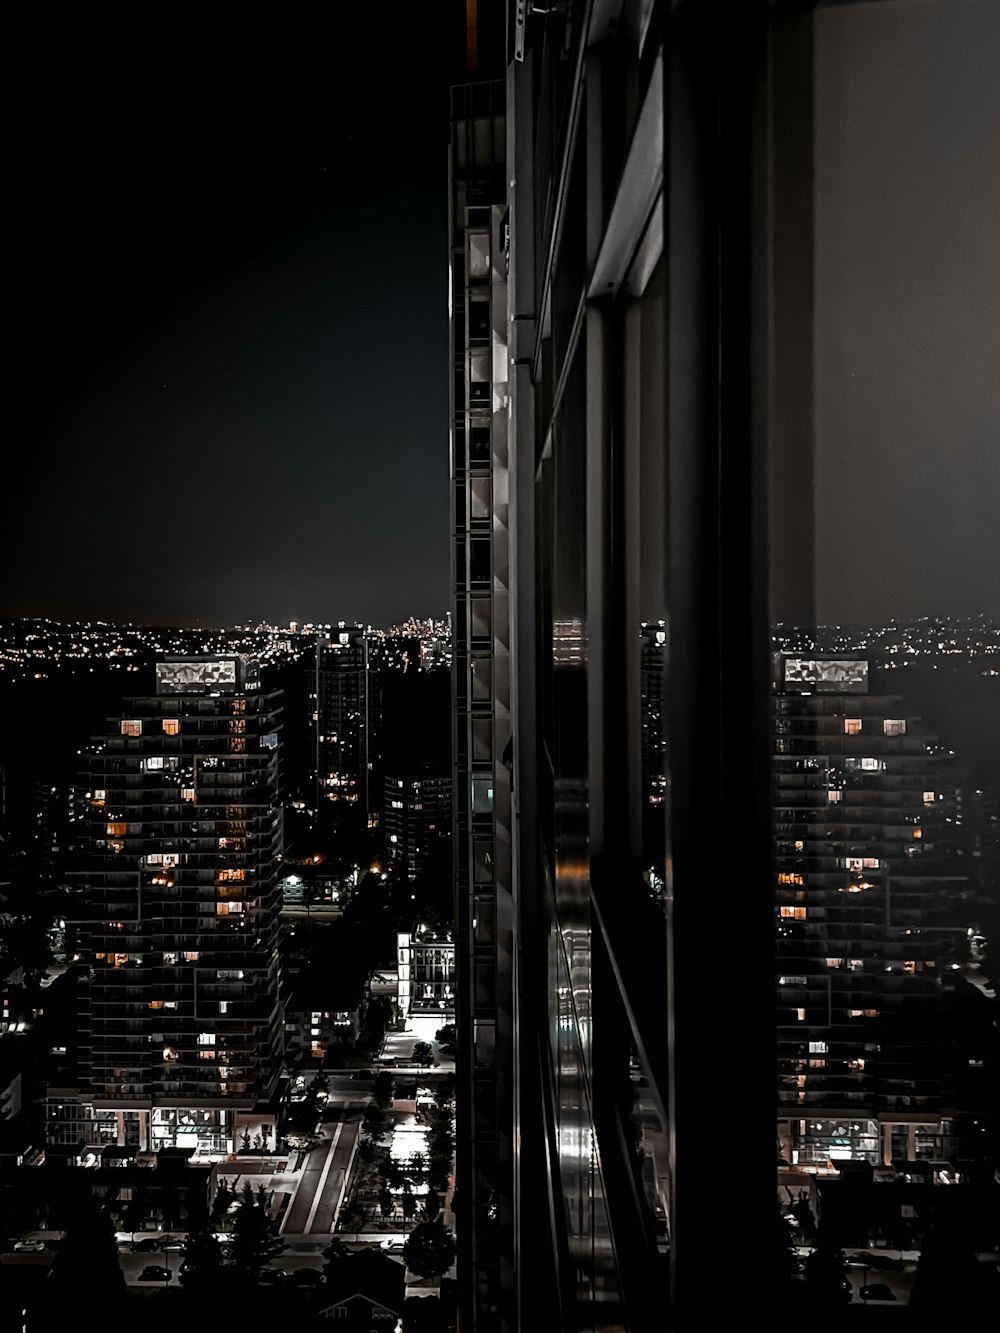 a view of a city at night from a tall building